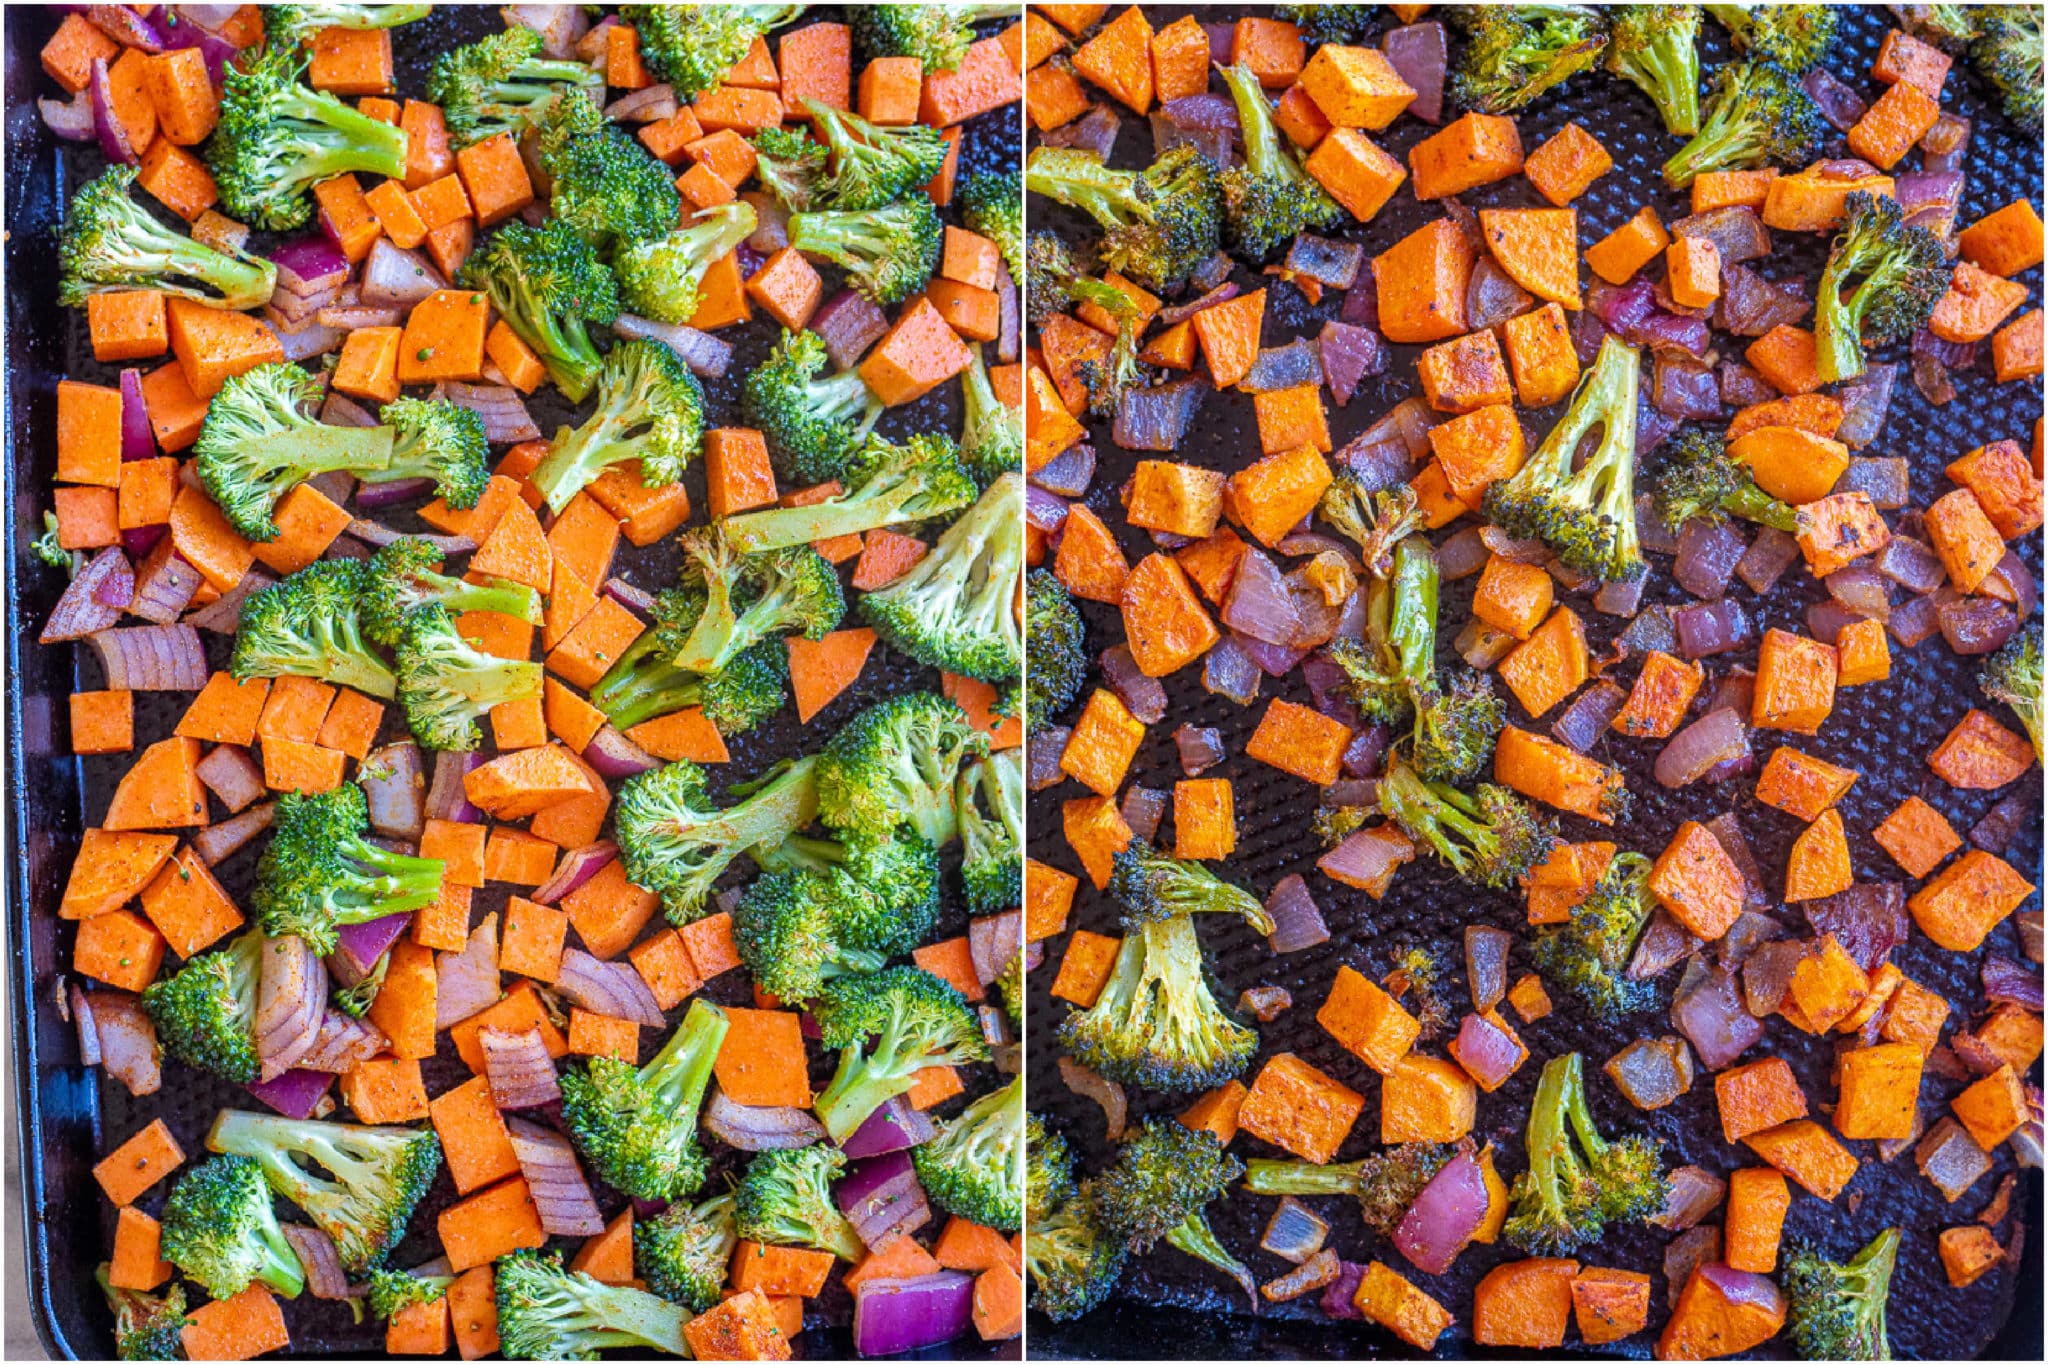 showing roasted sweet potato, broccoli and red onion before and after it has been roasted